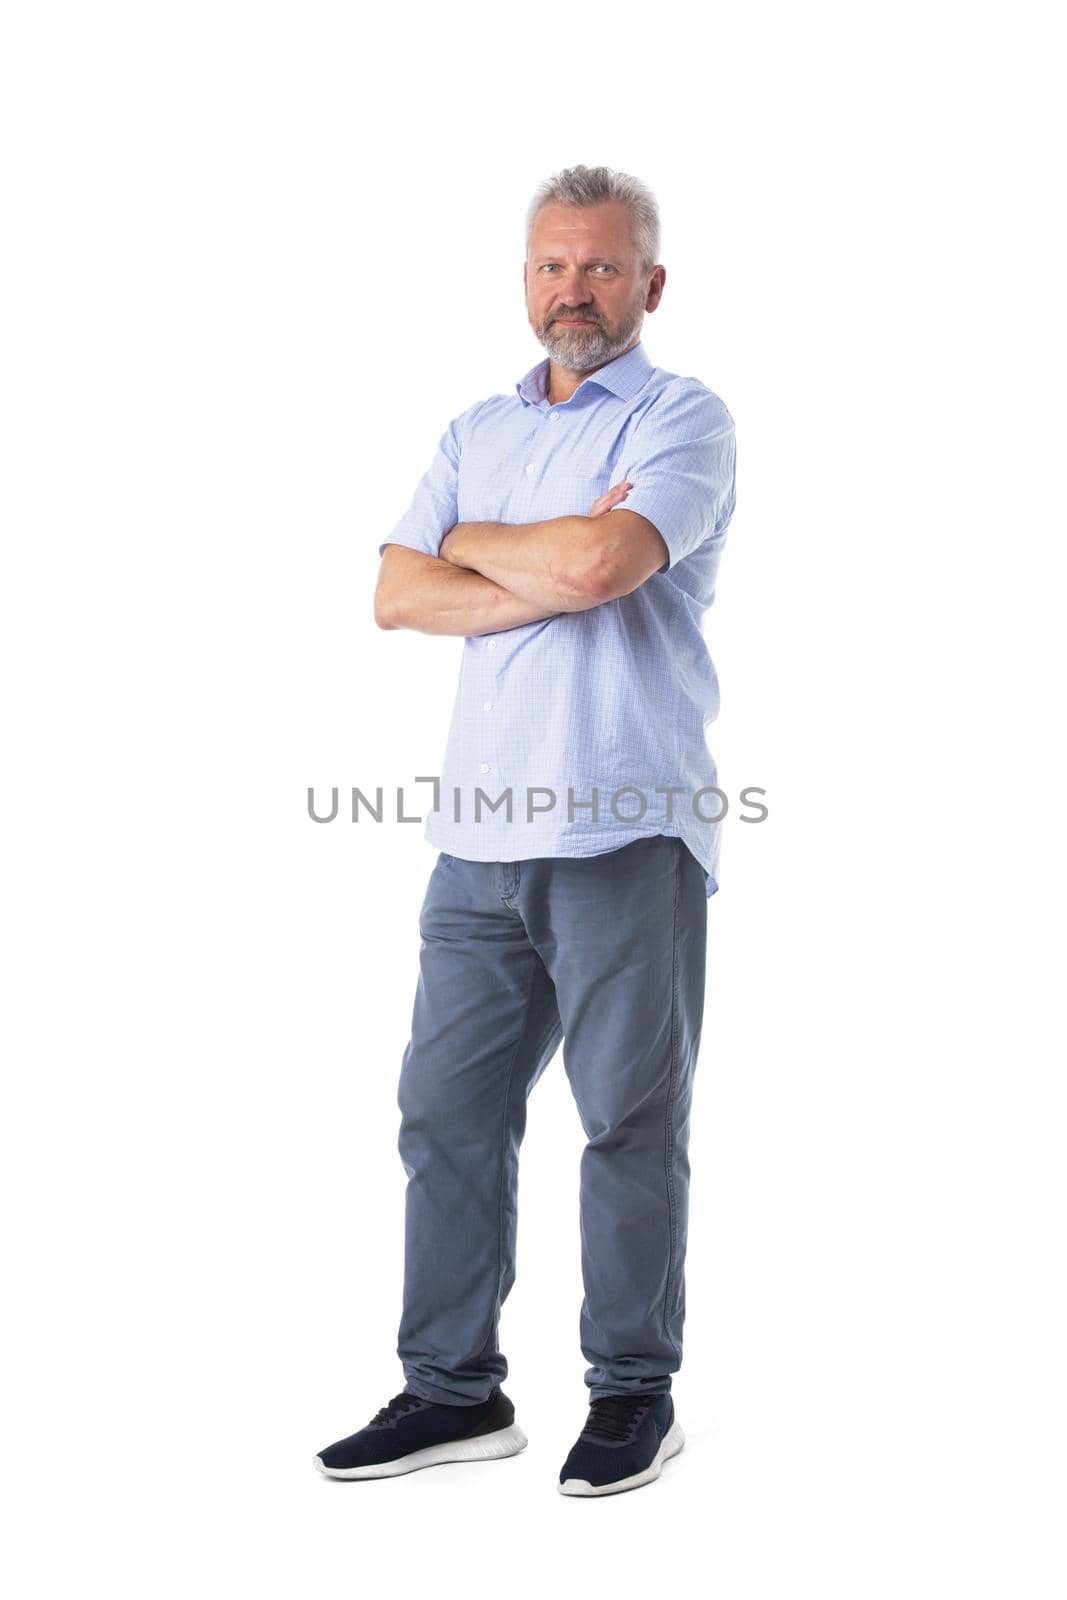 Full length portrait of mature man in casual clothes syanding with arms folded isolated on white background